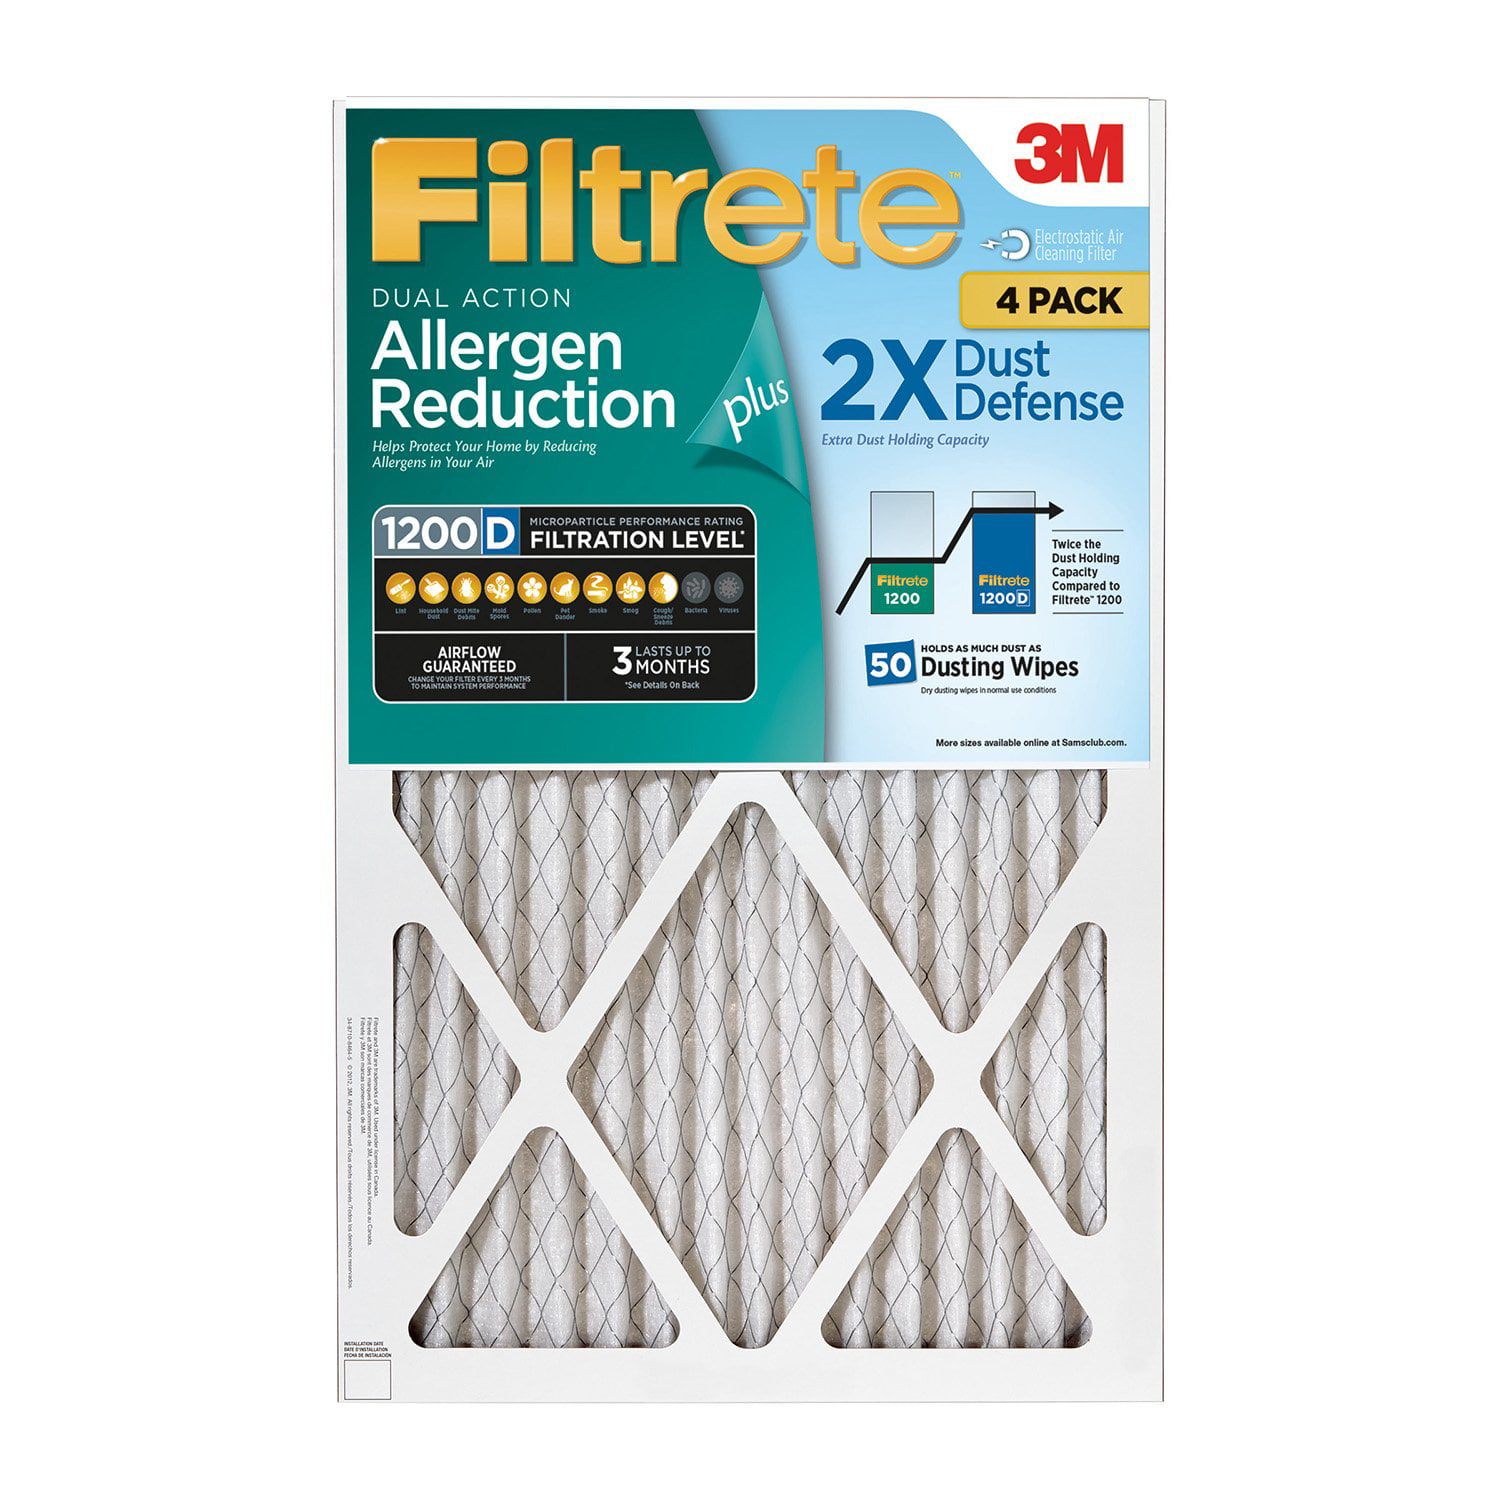 - Quantity 4 Dust Pleated Furnace Filter 16x20x1-In 9800PLUS-4 Dual Action Allergen